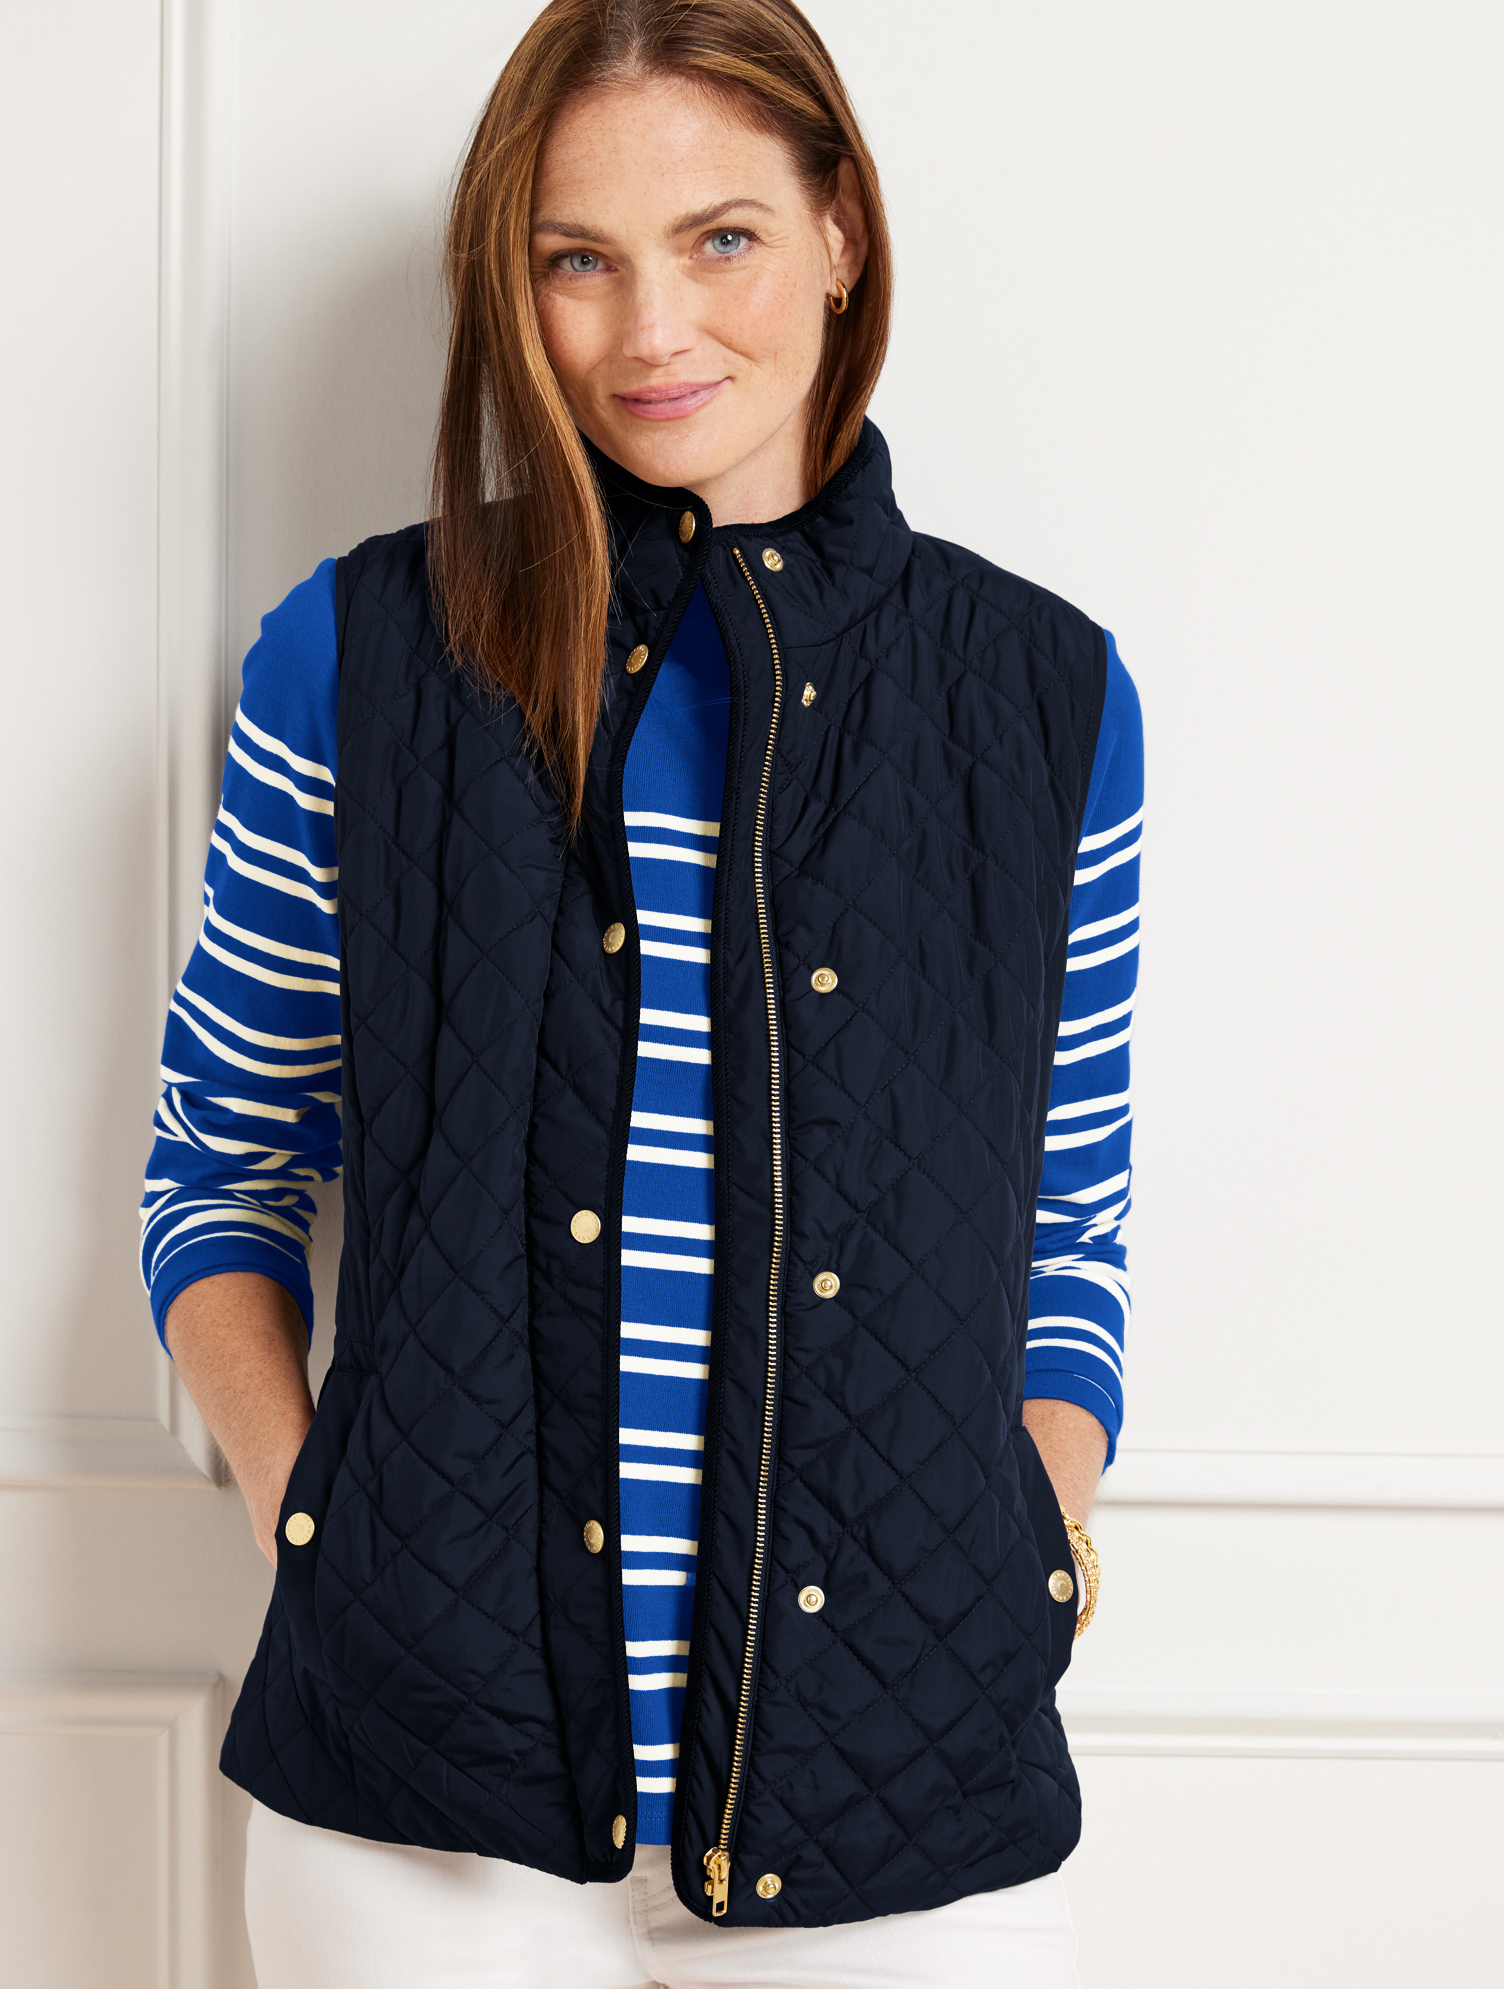 Talbots Quilted Vest - Blue - 1x